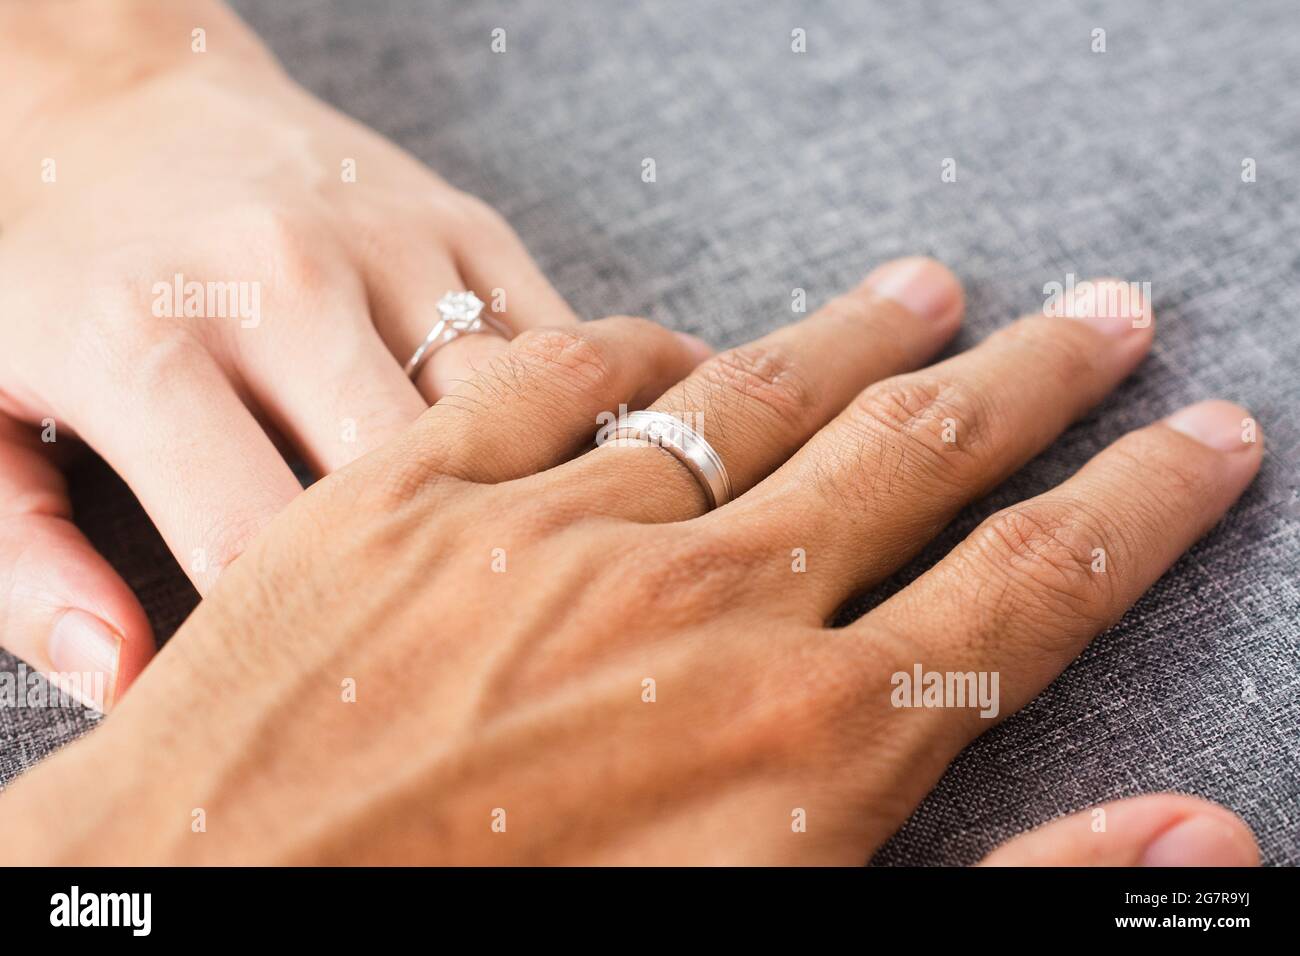 Personalized Black Couple Rings with Customized Engraving